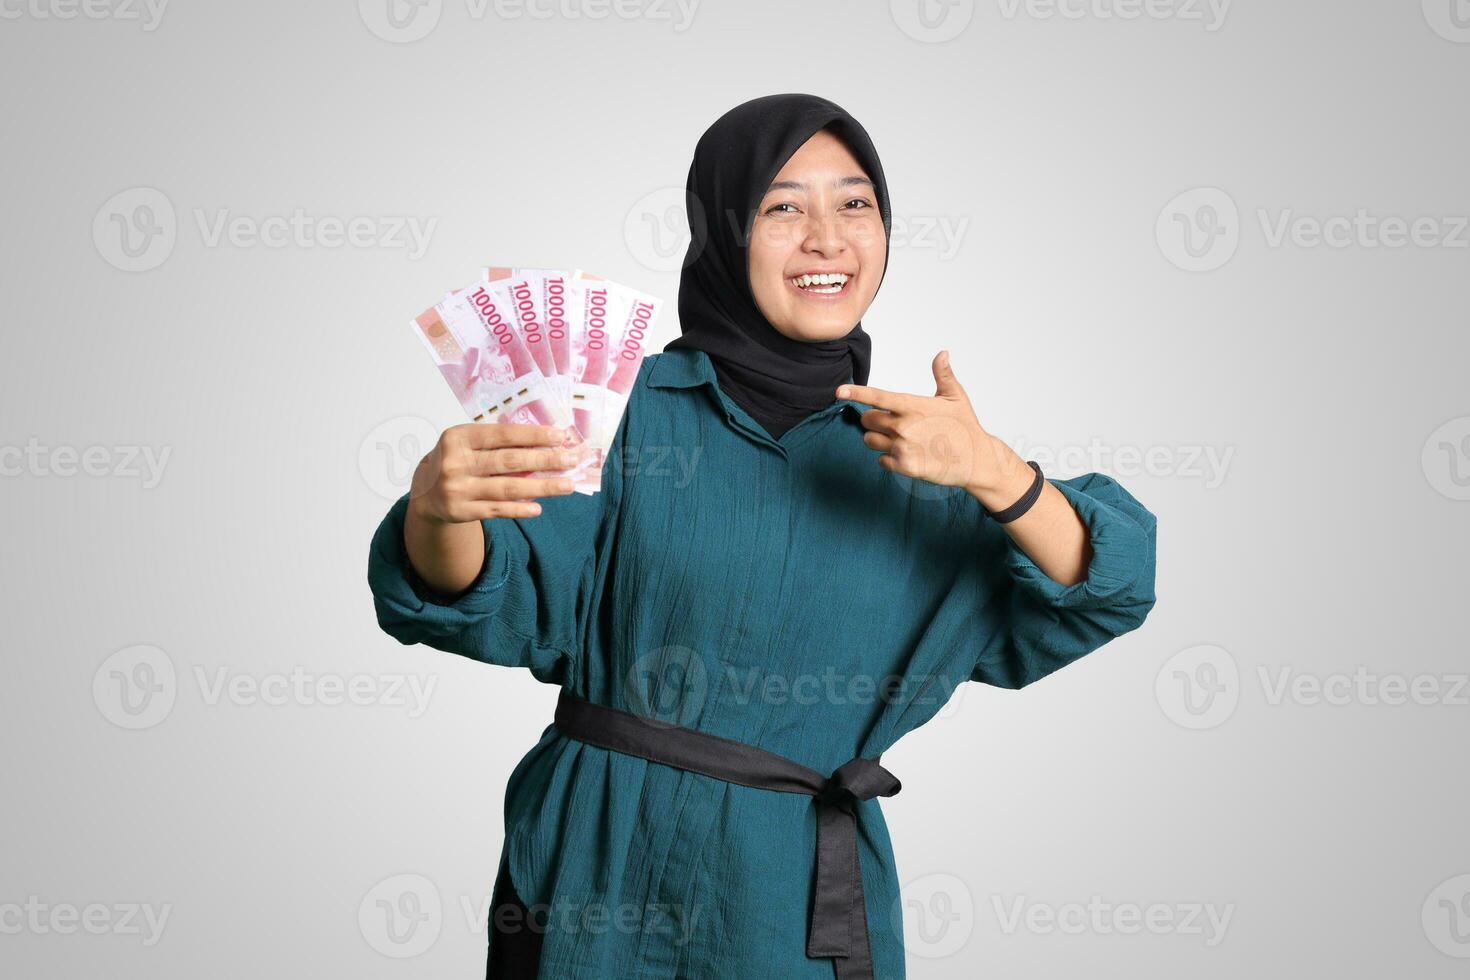 Portrait of excited Asian hijab woman in casual outfit showing and pointing one hundred thousand rupiah. Financial and savings concept. Isolated image on white background photo